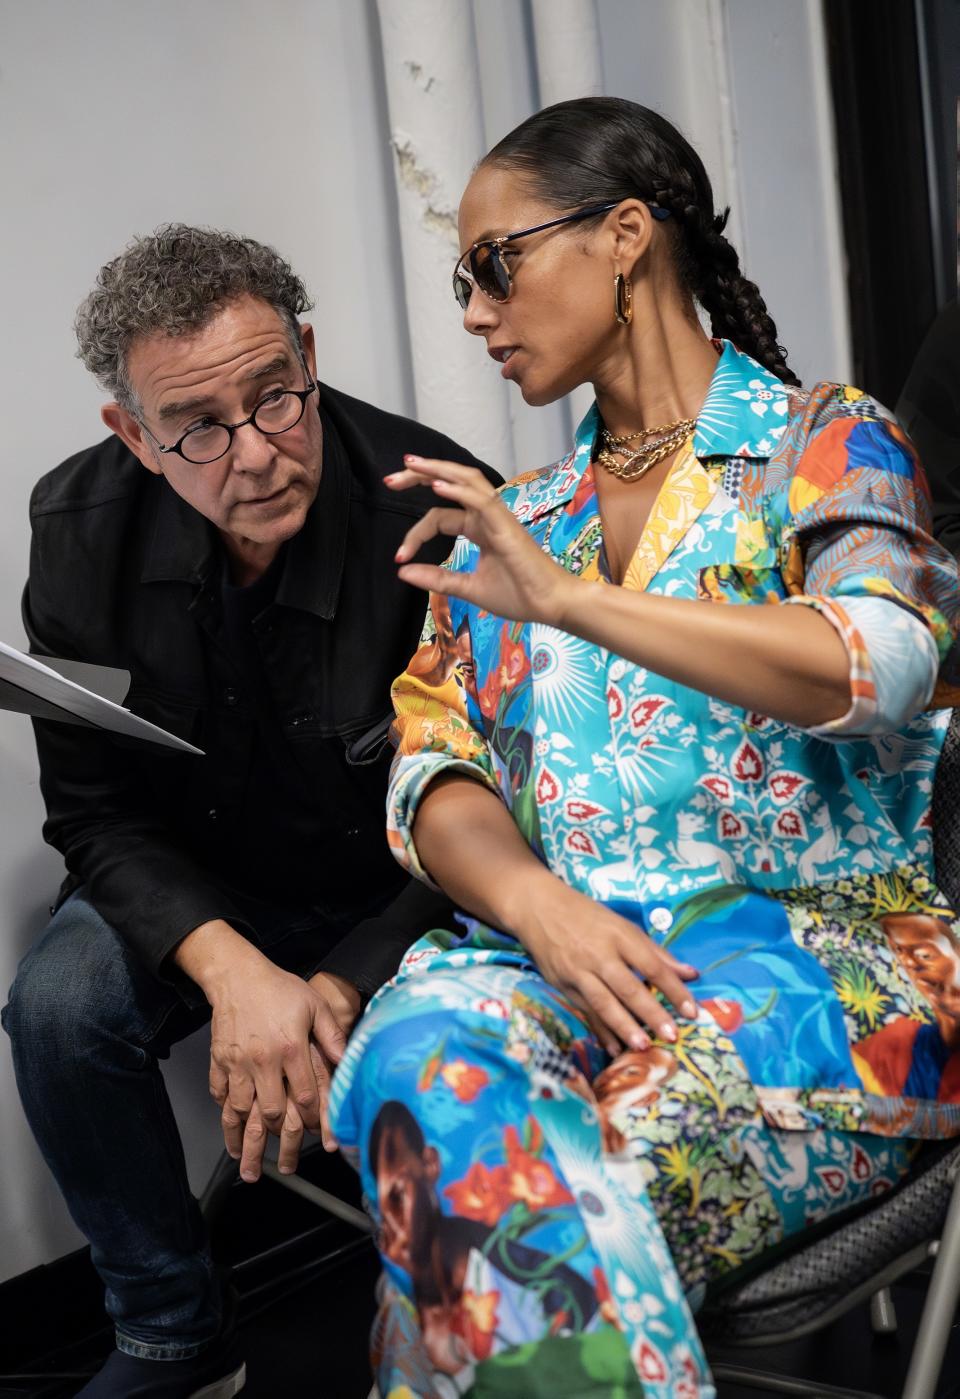 Director Michael Greif and composer Alicia Keys in 'Hell's Kitchen' rehearsal 